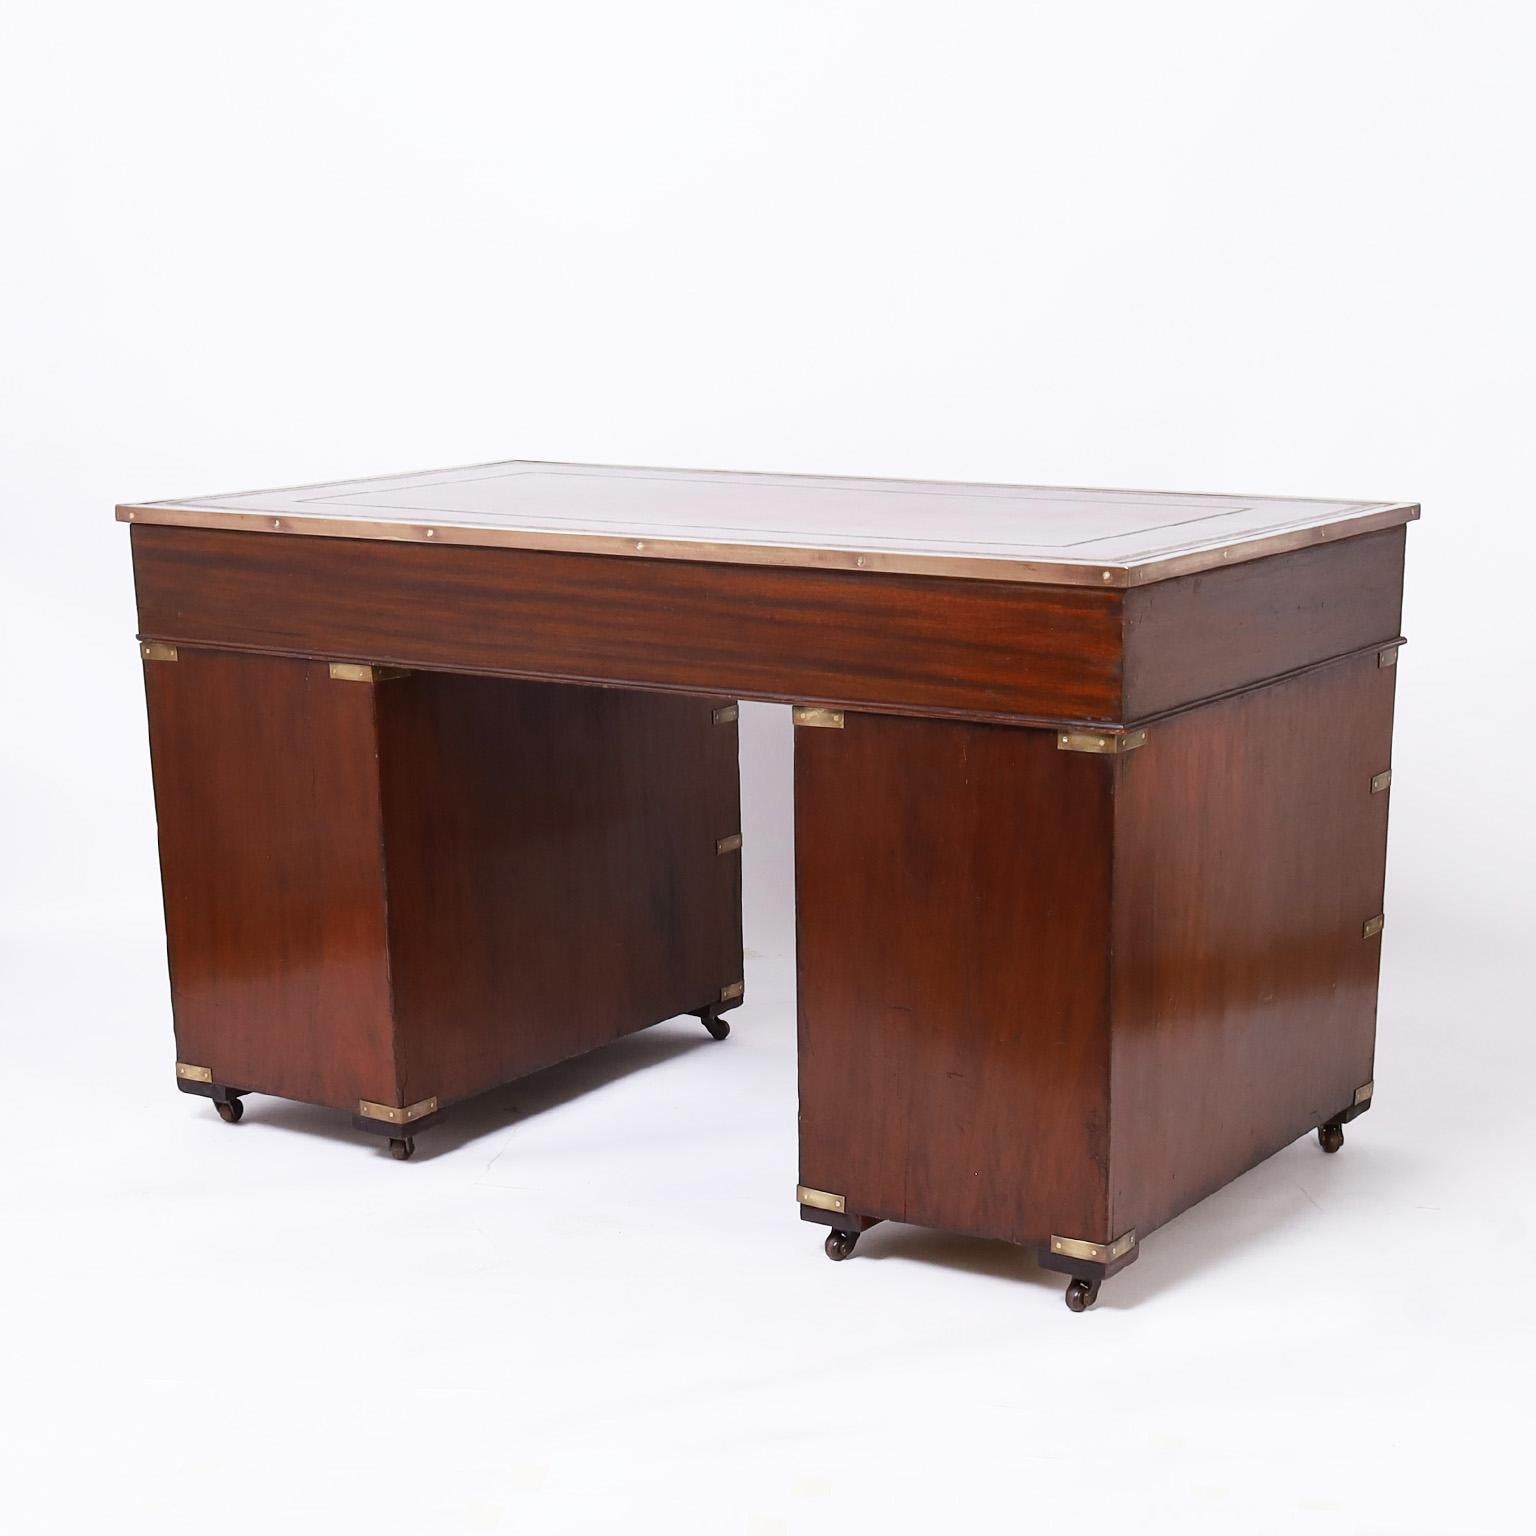 Hand-Crafted English Leather Top Campaign Desk